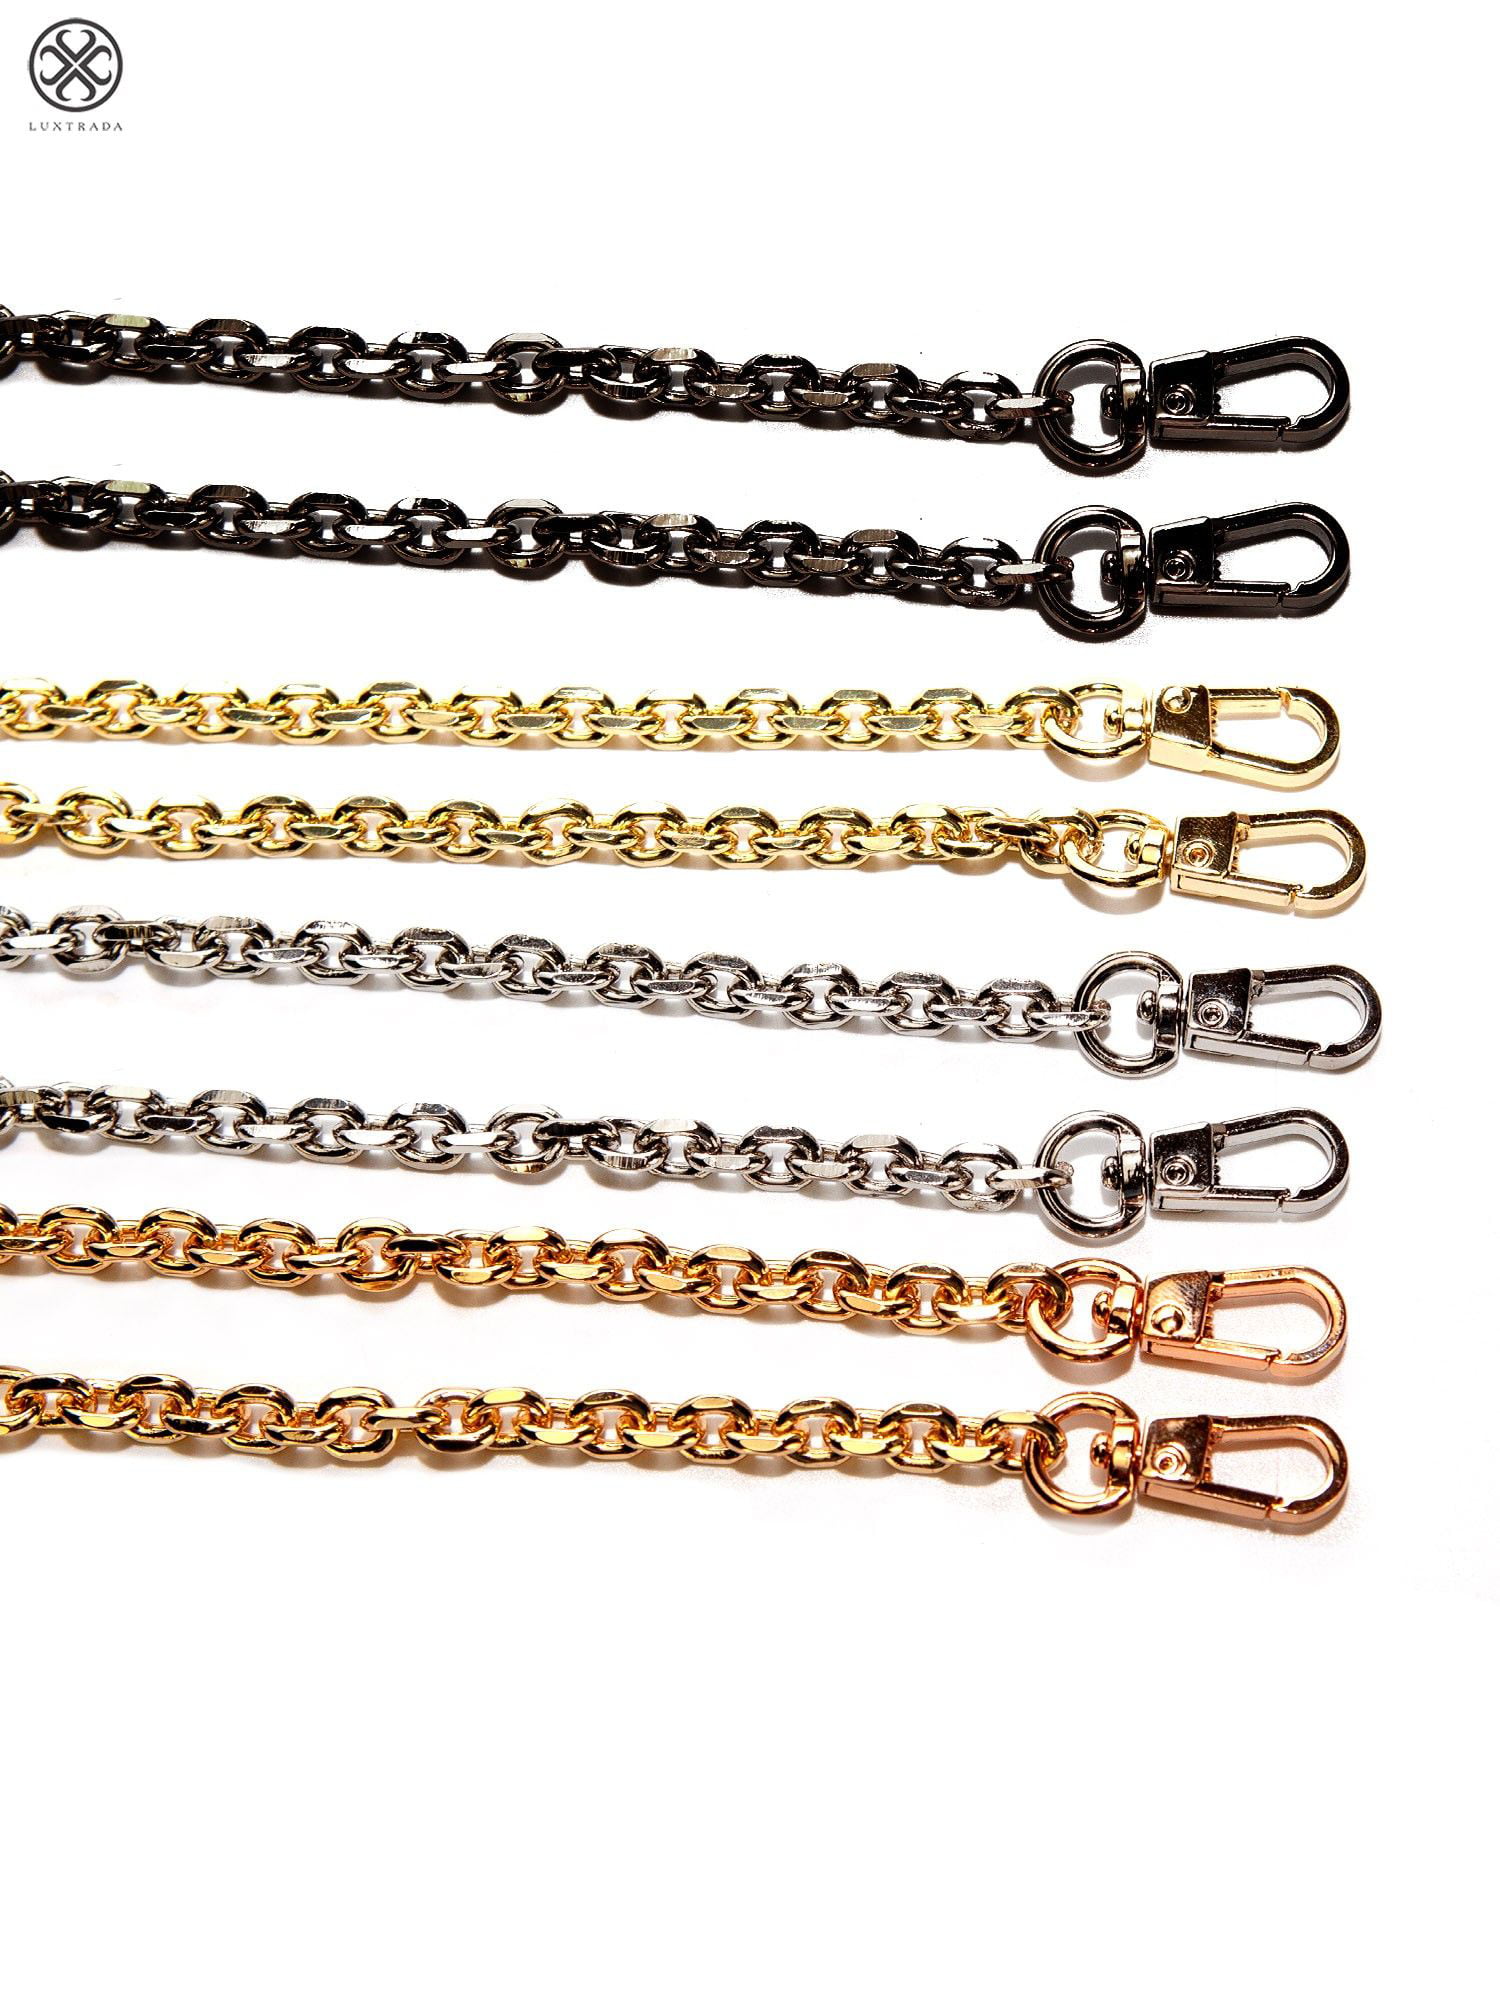  WEICHUAN 47/120cm DIY Iron Flat Chain Strap Purse Chain  Accessories Purse Straps Shoulder Cross Body Replacement Straps, with Metal  Buckles (Gold)